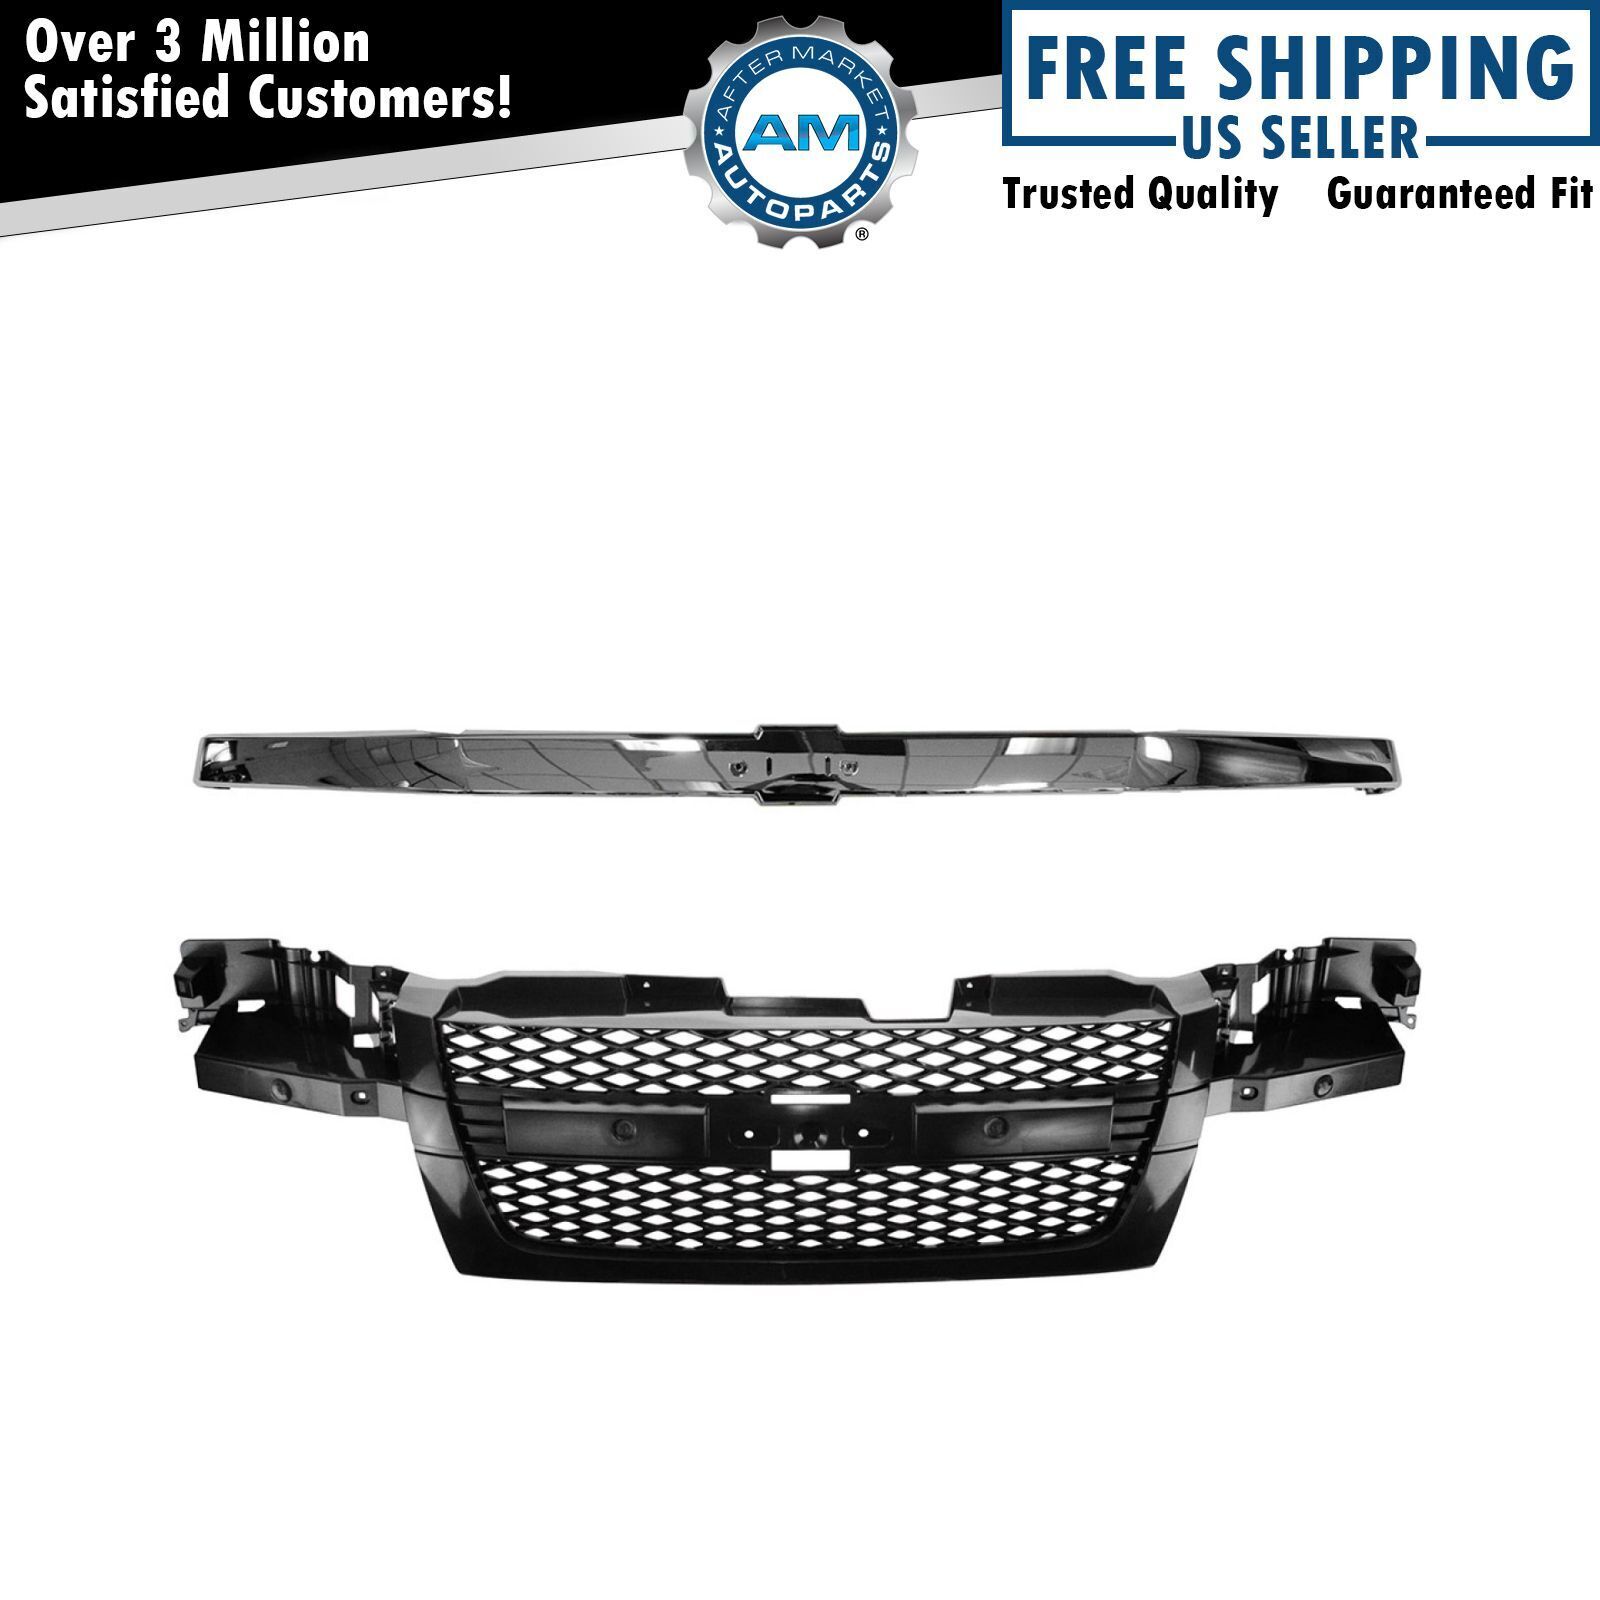 Brand New Grille With Chrome Bar Molding For Chevy Colorado 2004-2012 NEW